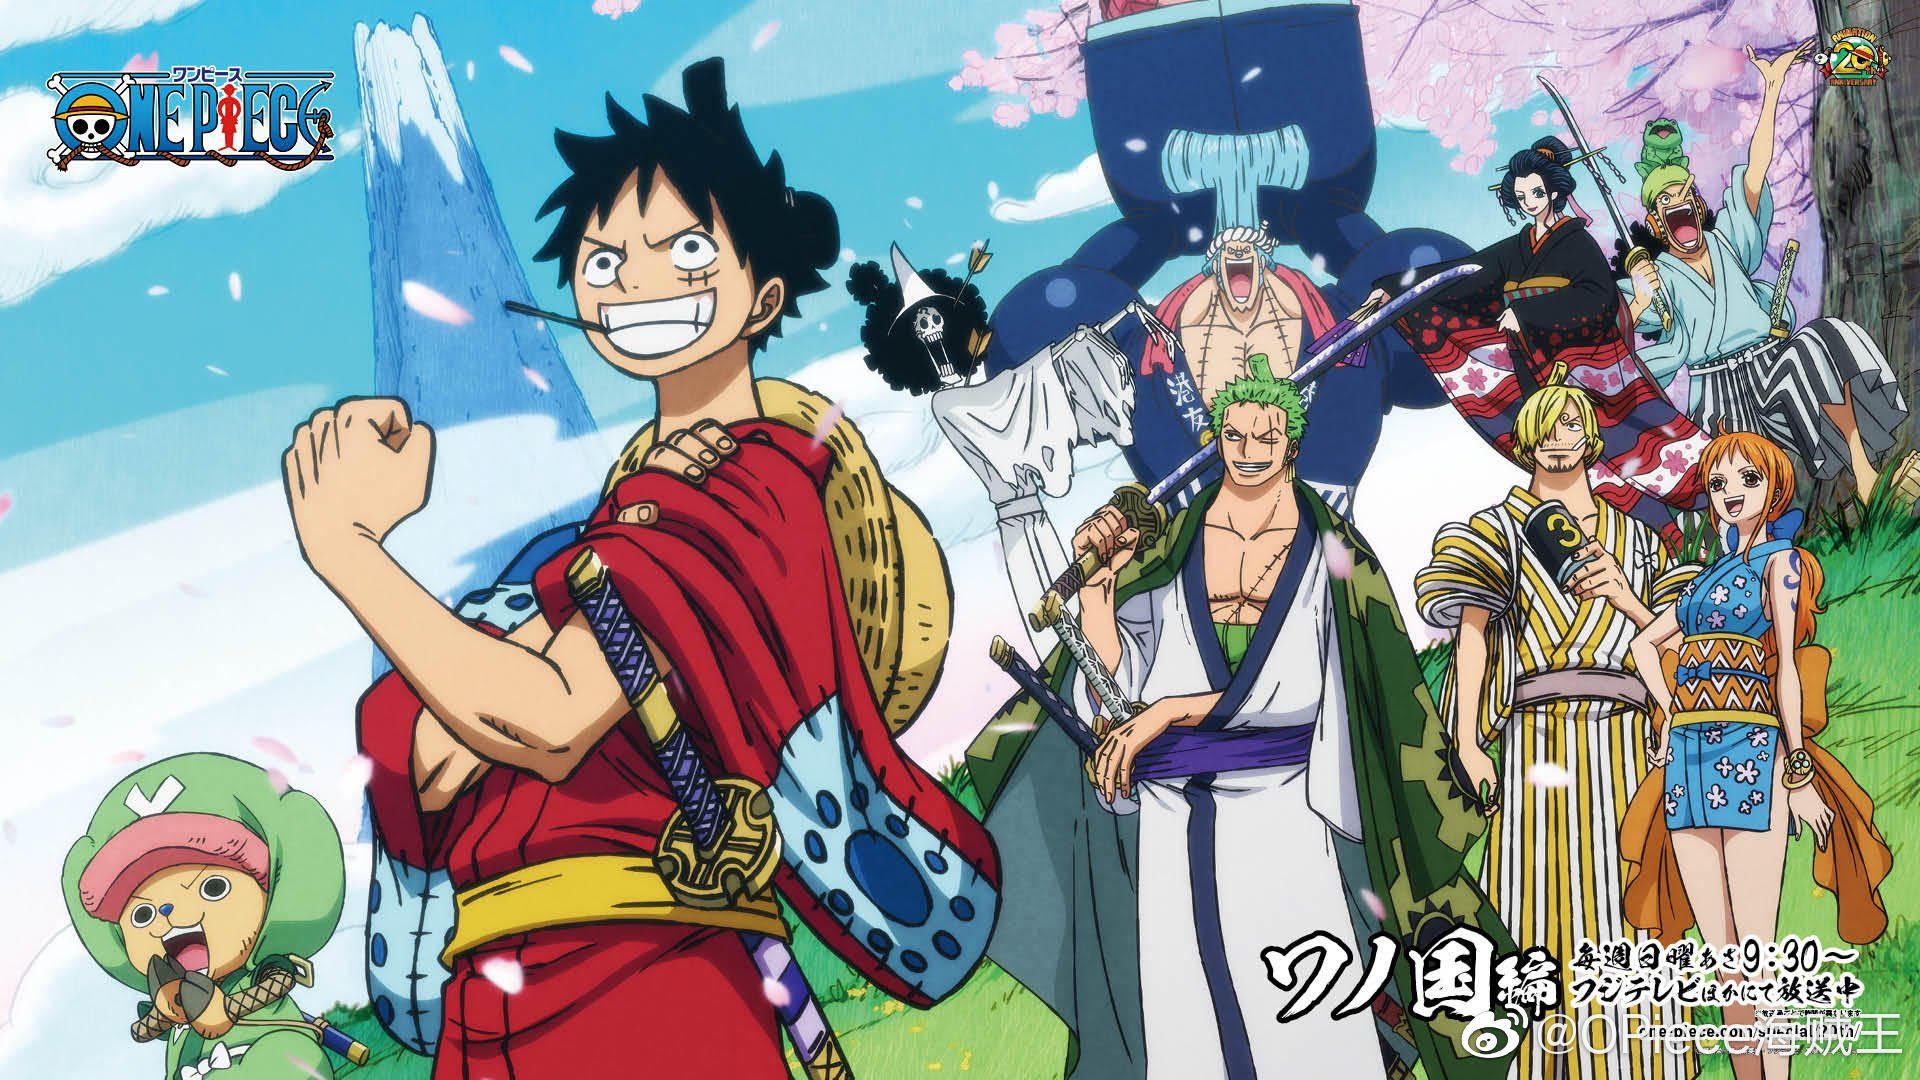 One Piece Ending: When will the Manga Series get over, and what will be the Final Reveal?